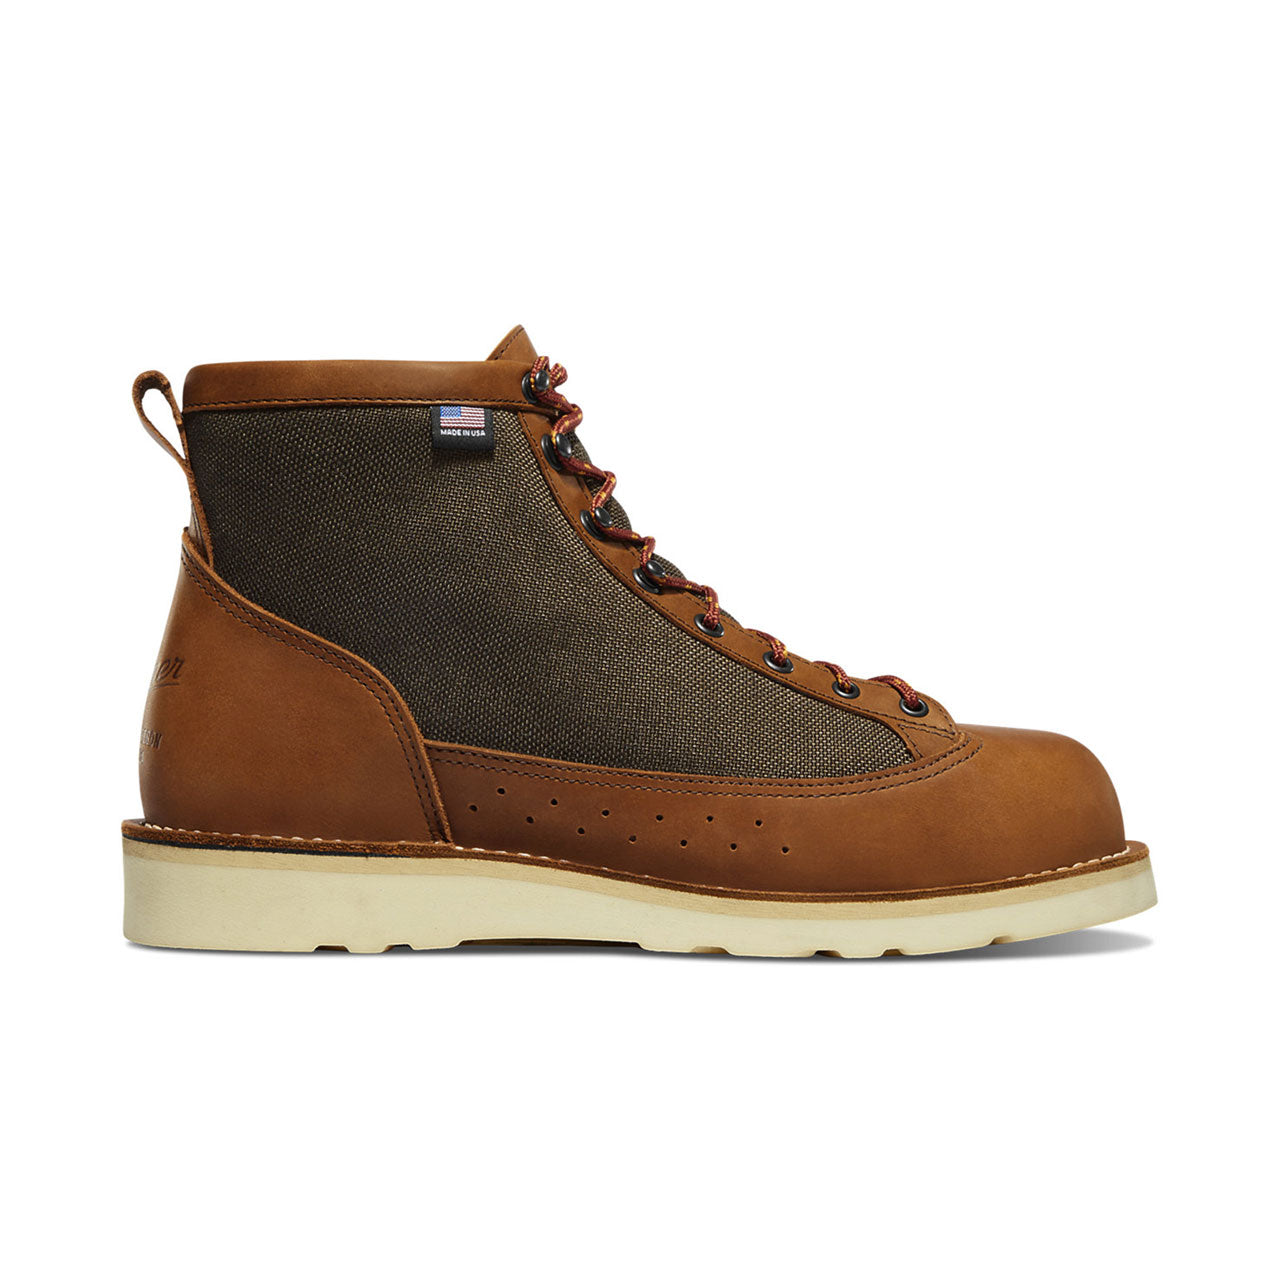 Danner Westslope Wedge Boots | Uncrate Supply